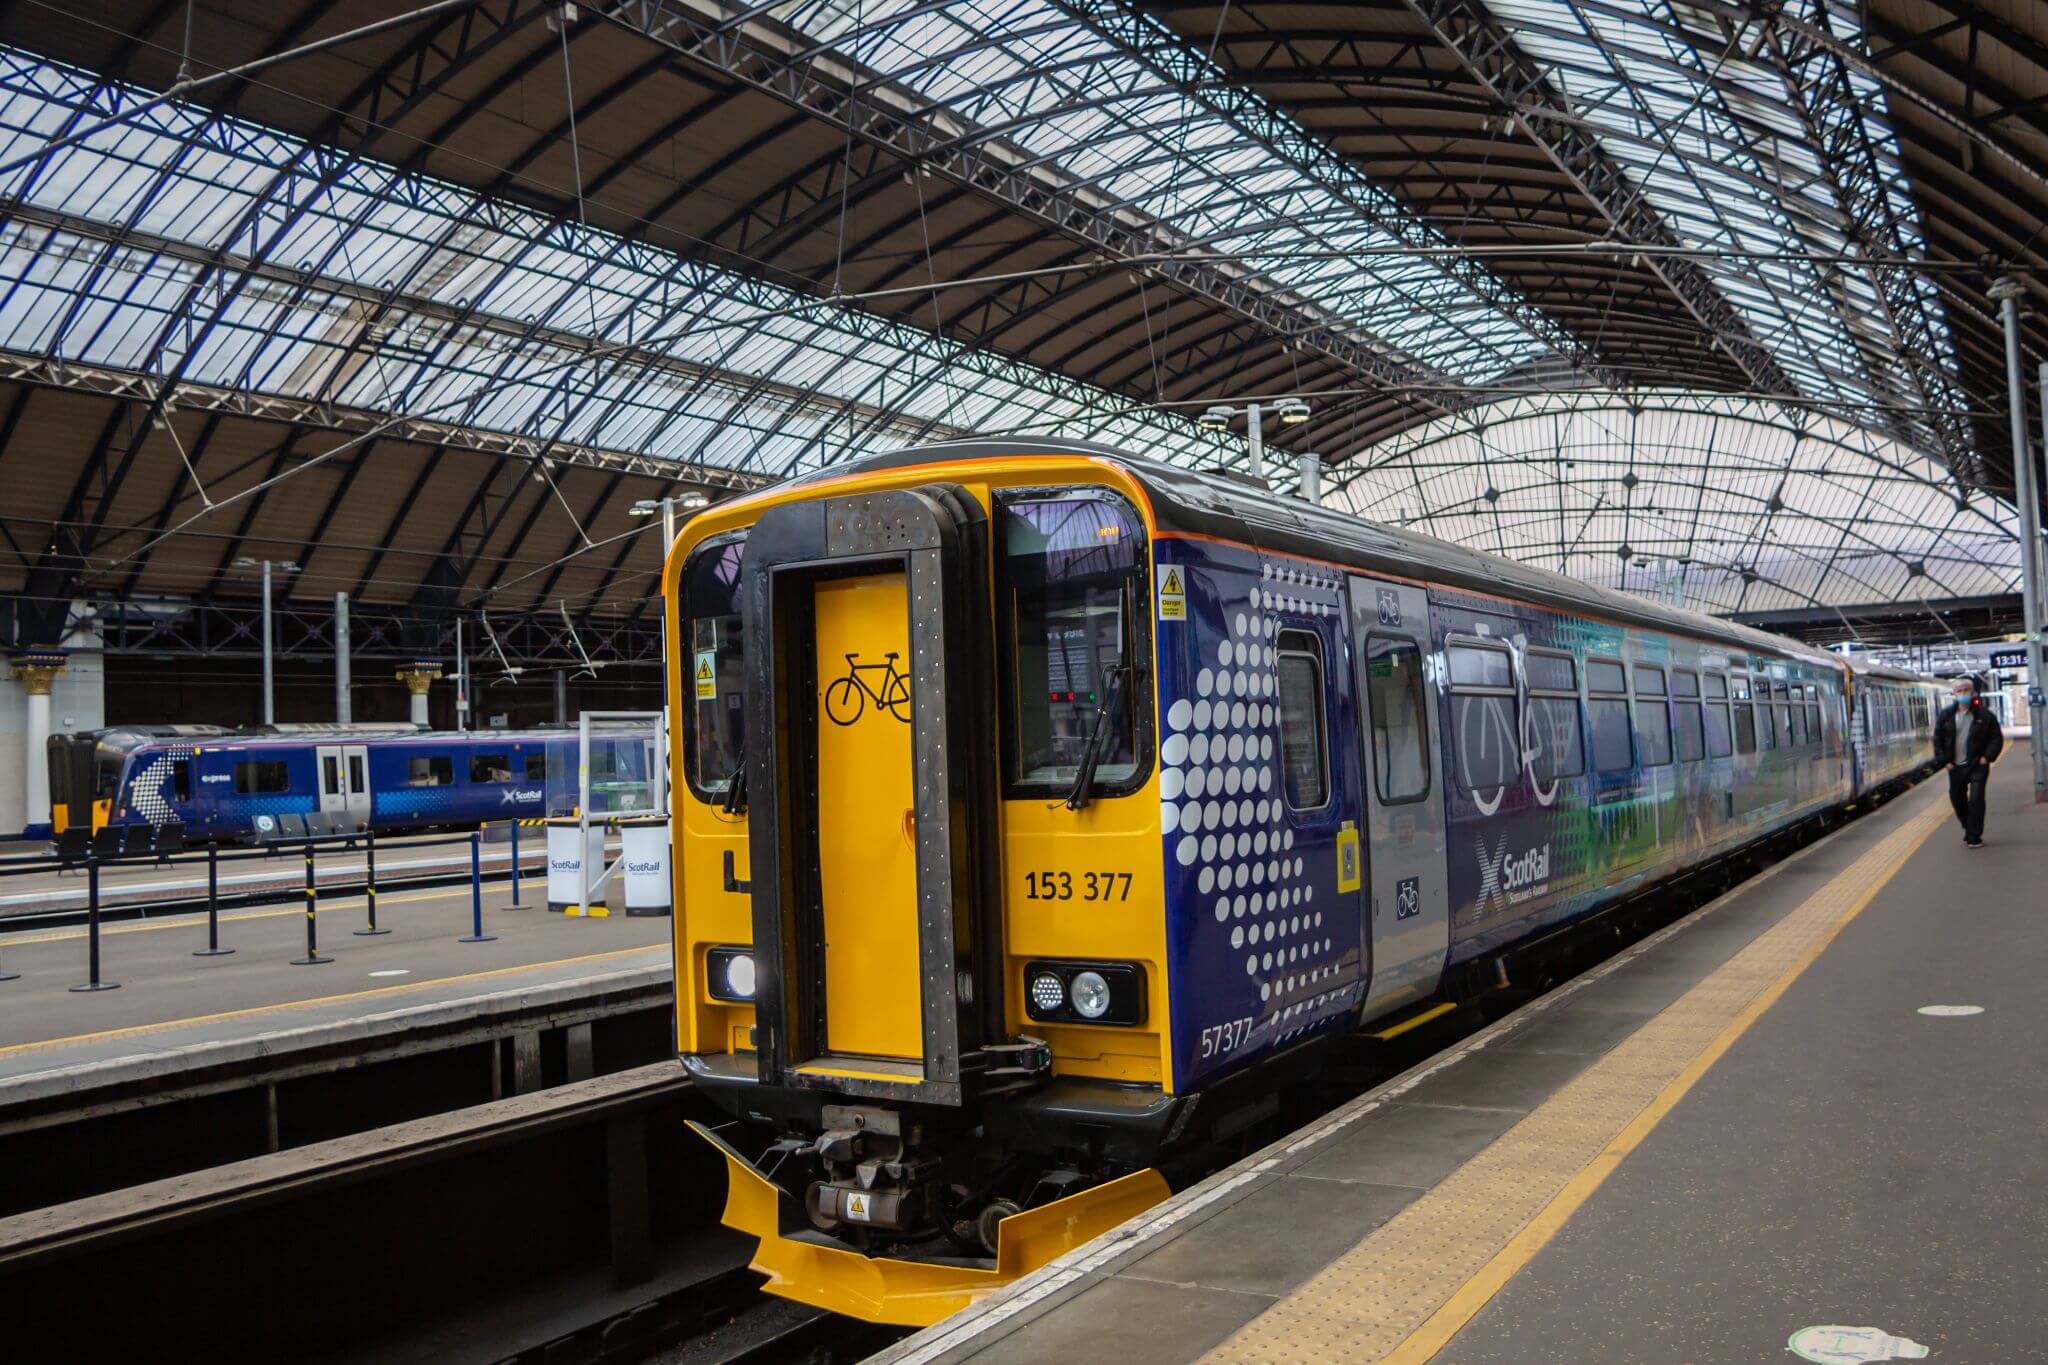 The ScotRail Highland Explorer carriage